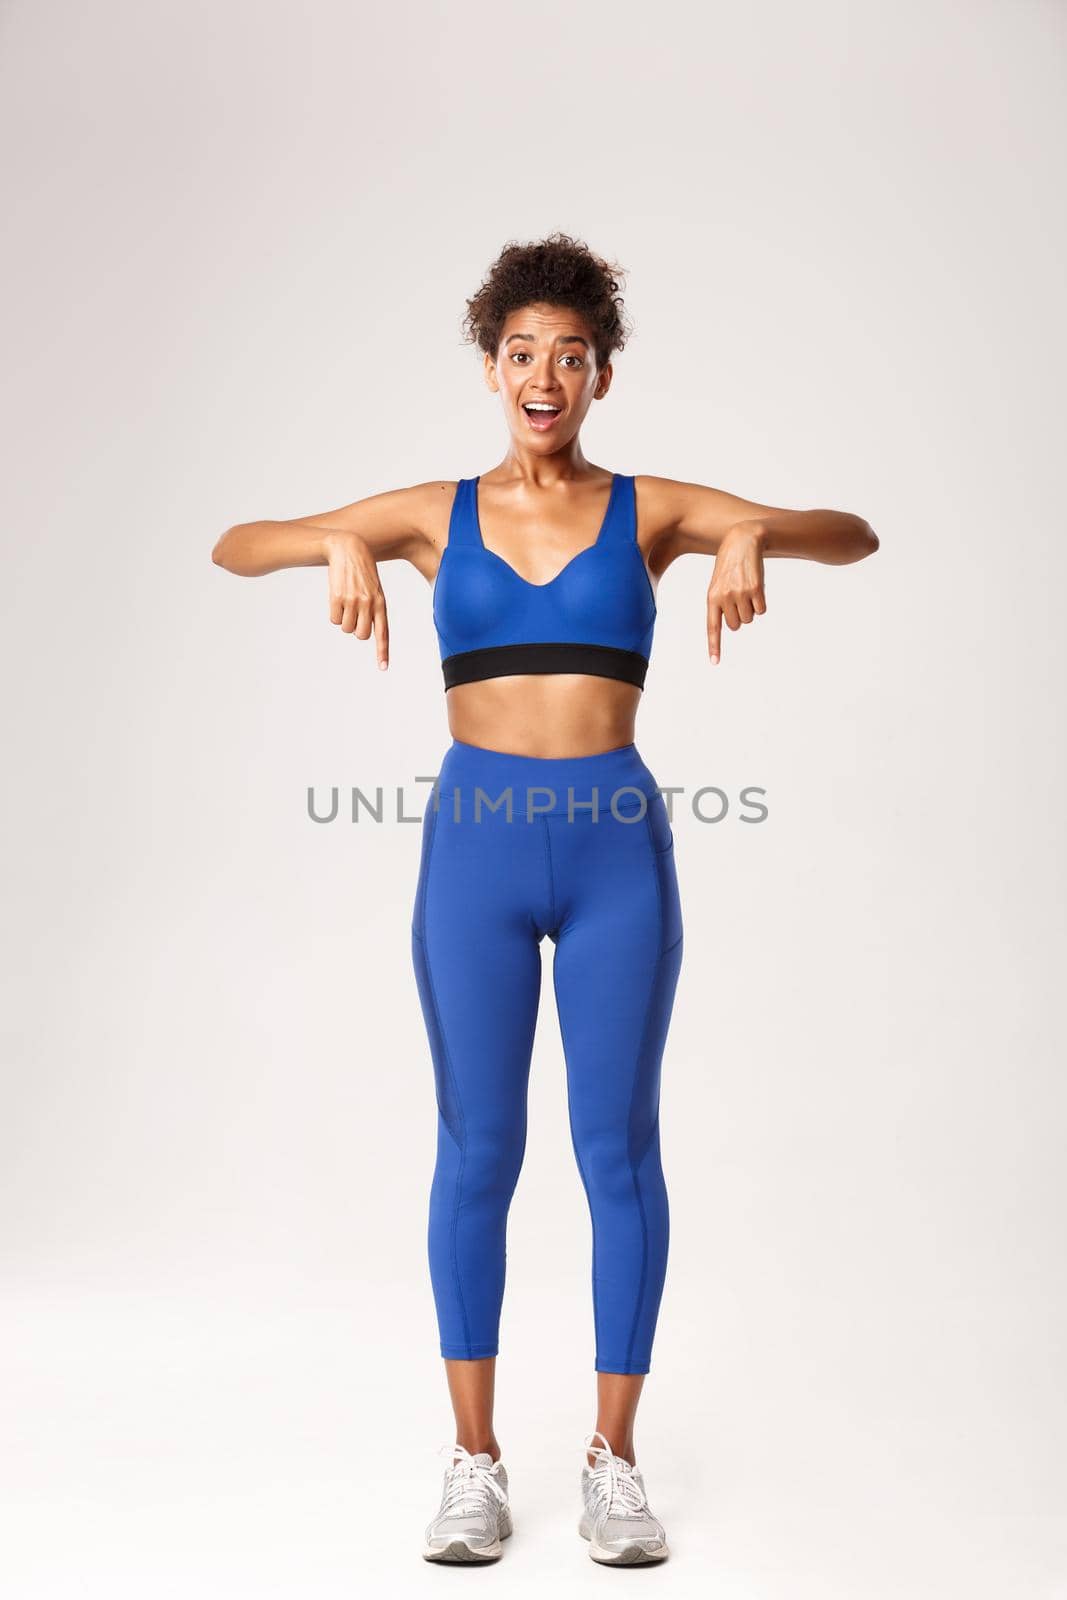 Full length of surprised african-american fitness girl, wearing blue sports outfit, pointing fingers down with amused smile, standing against white background.